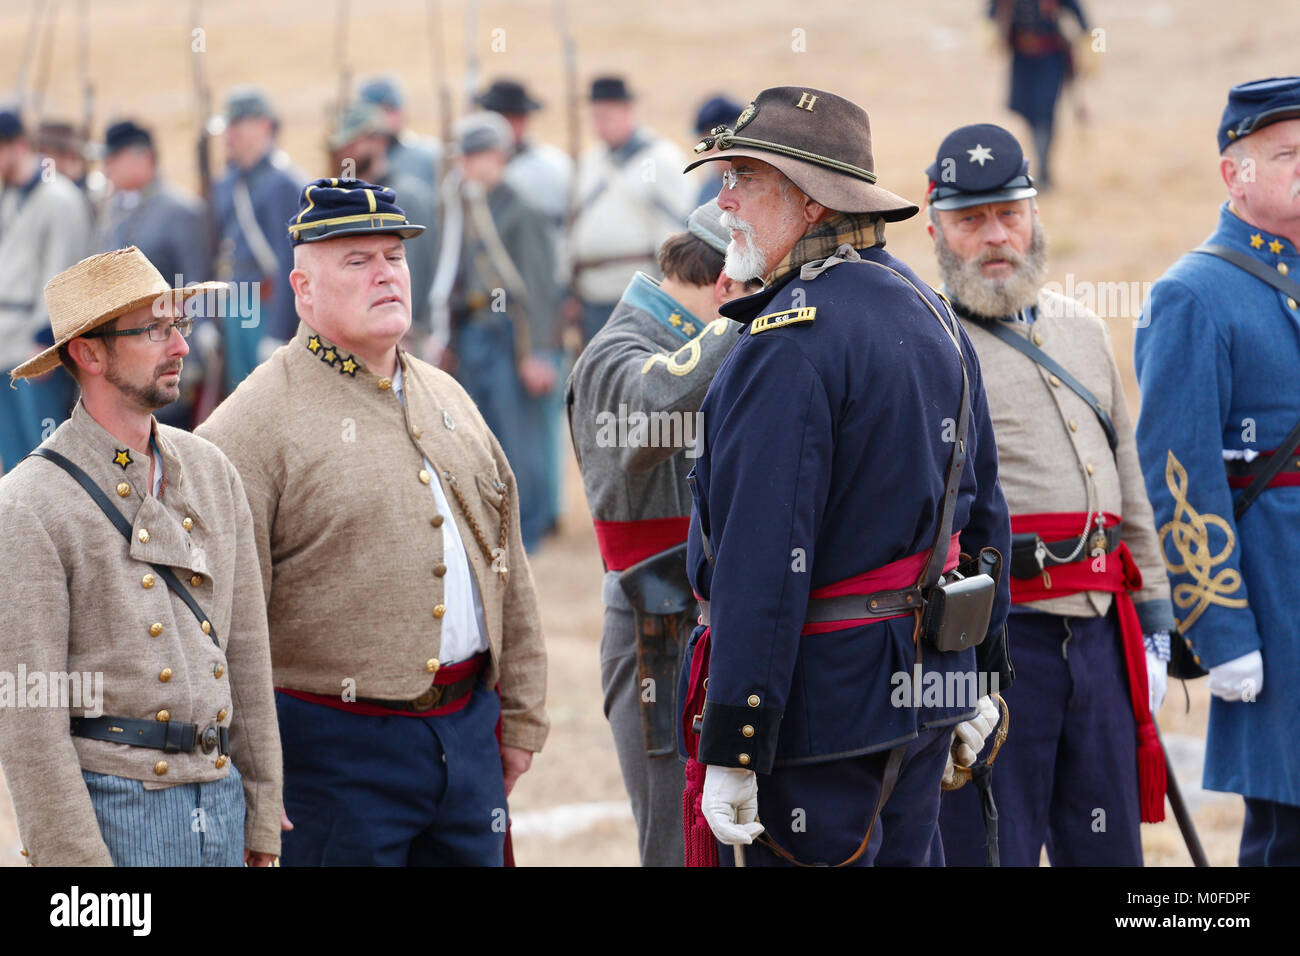 Civil War Re-enactment of a battle that happened in Hernando County, Florida in July of l864. Stock Photo